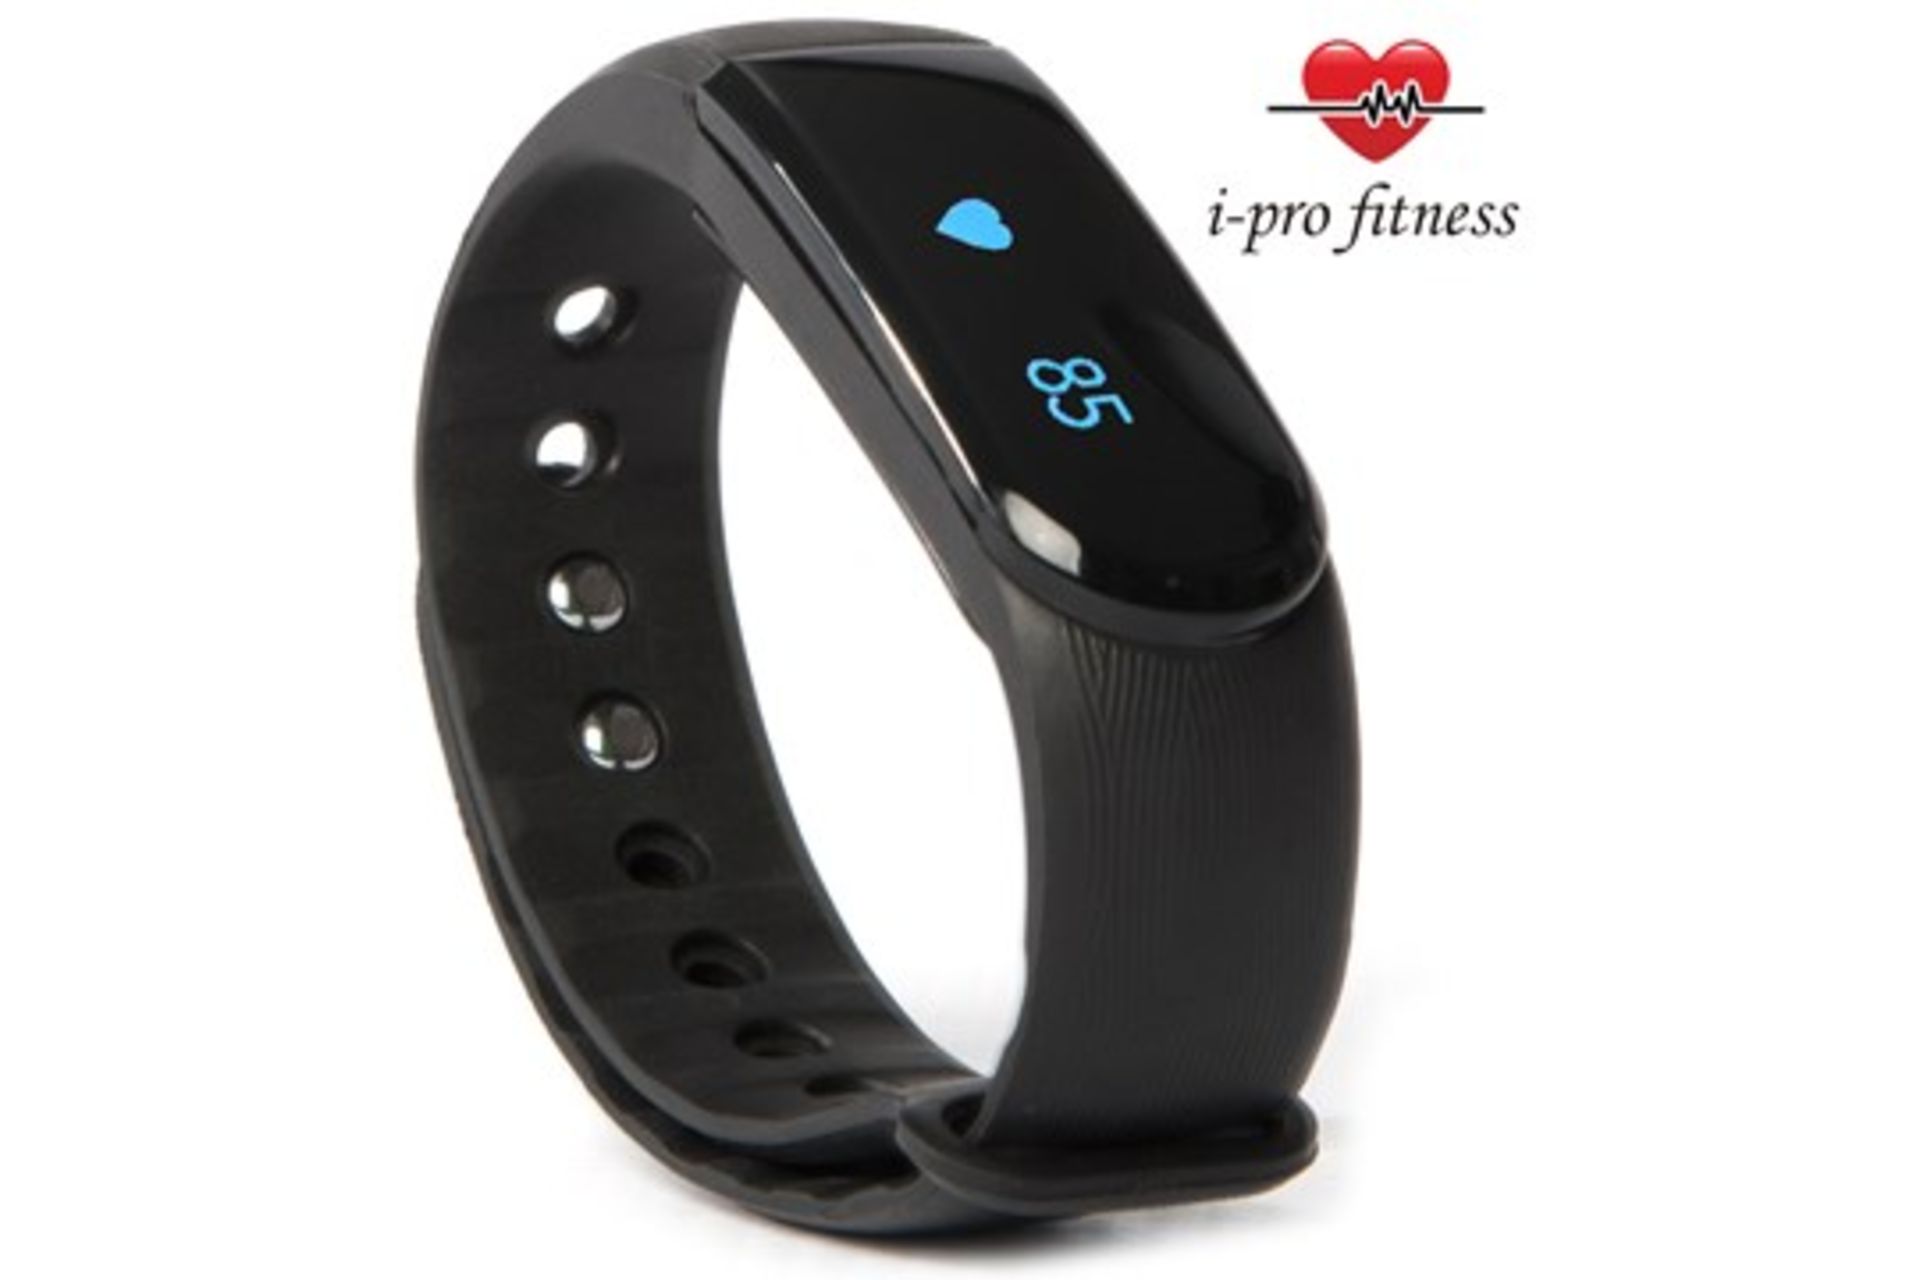 **Bulk Buy** 10X I-Pro Id101 Fitness Tracker Seamless Pairing With Veryfit 2.0 App Bluetooth - Image 2 of 5